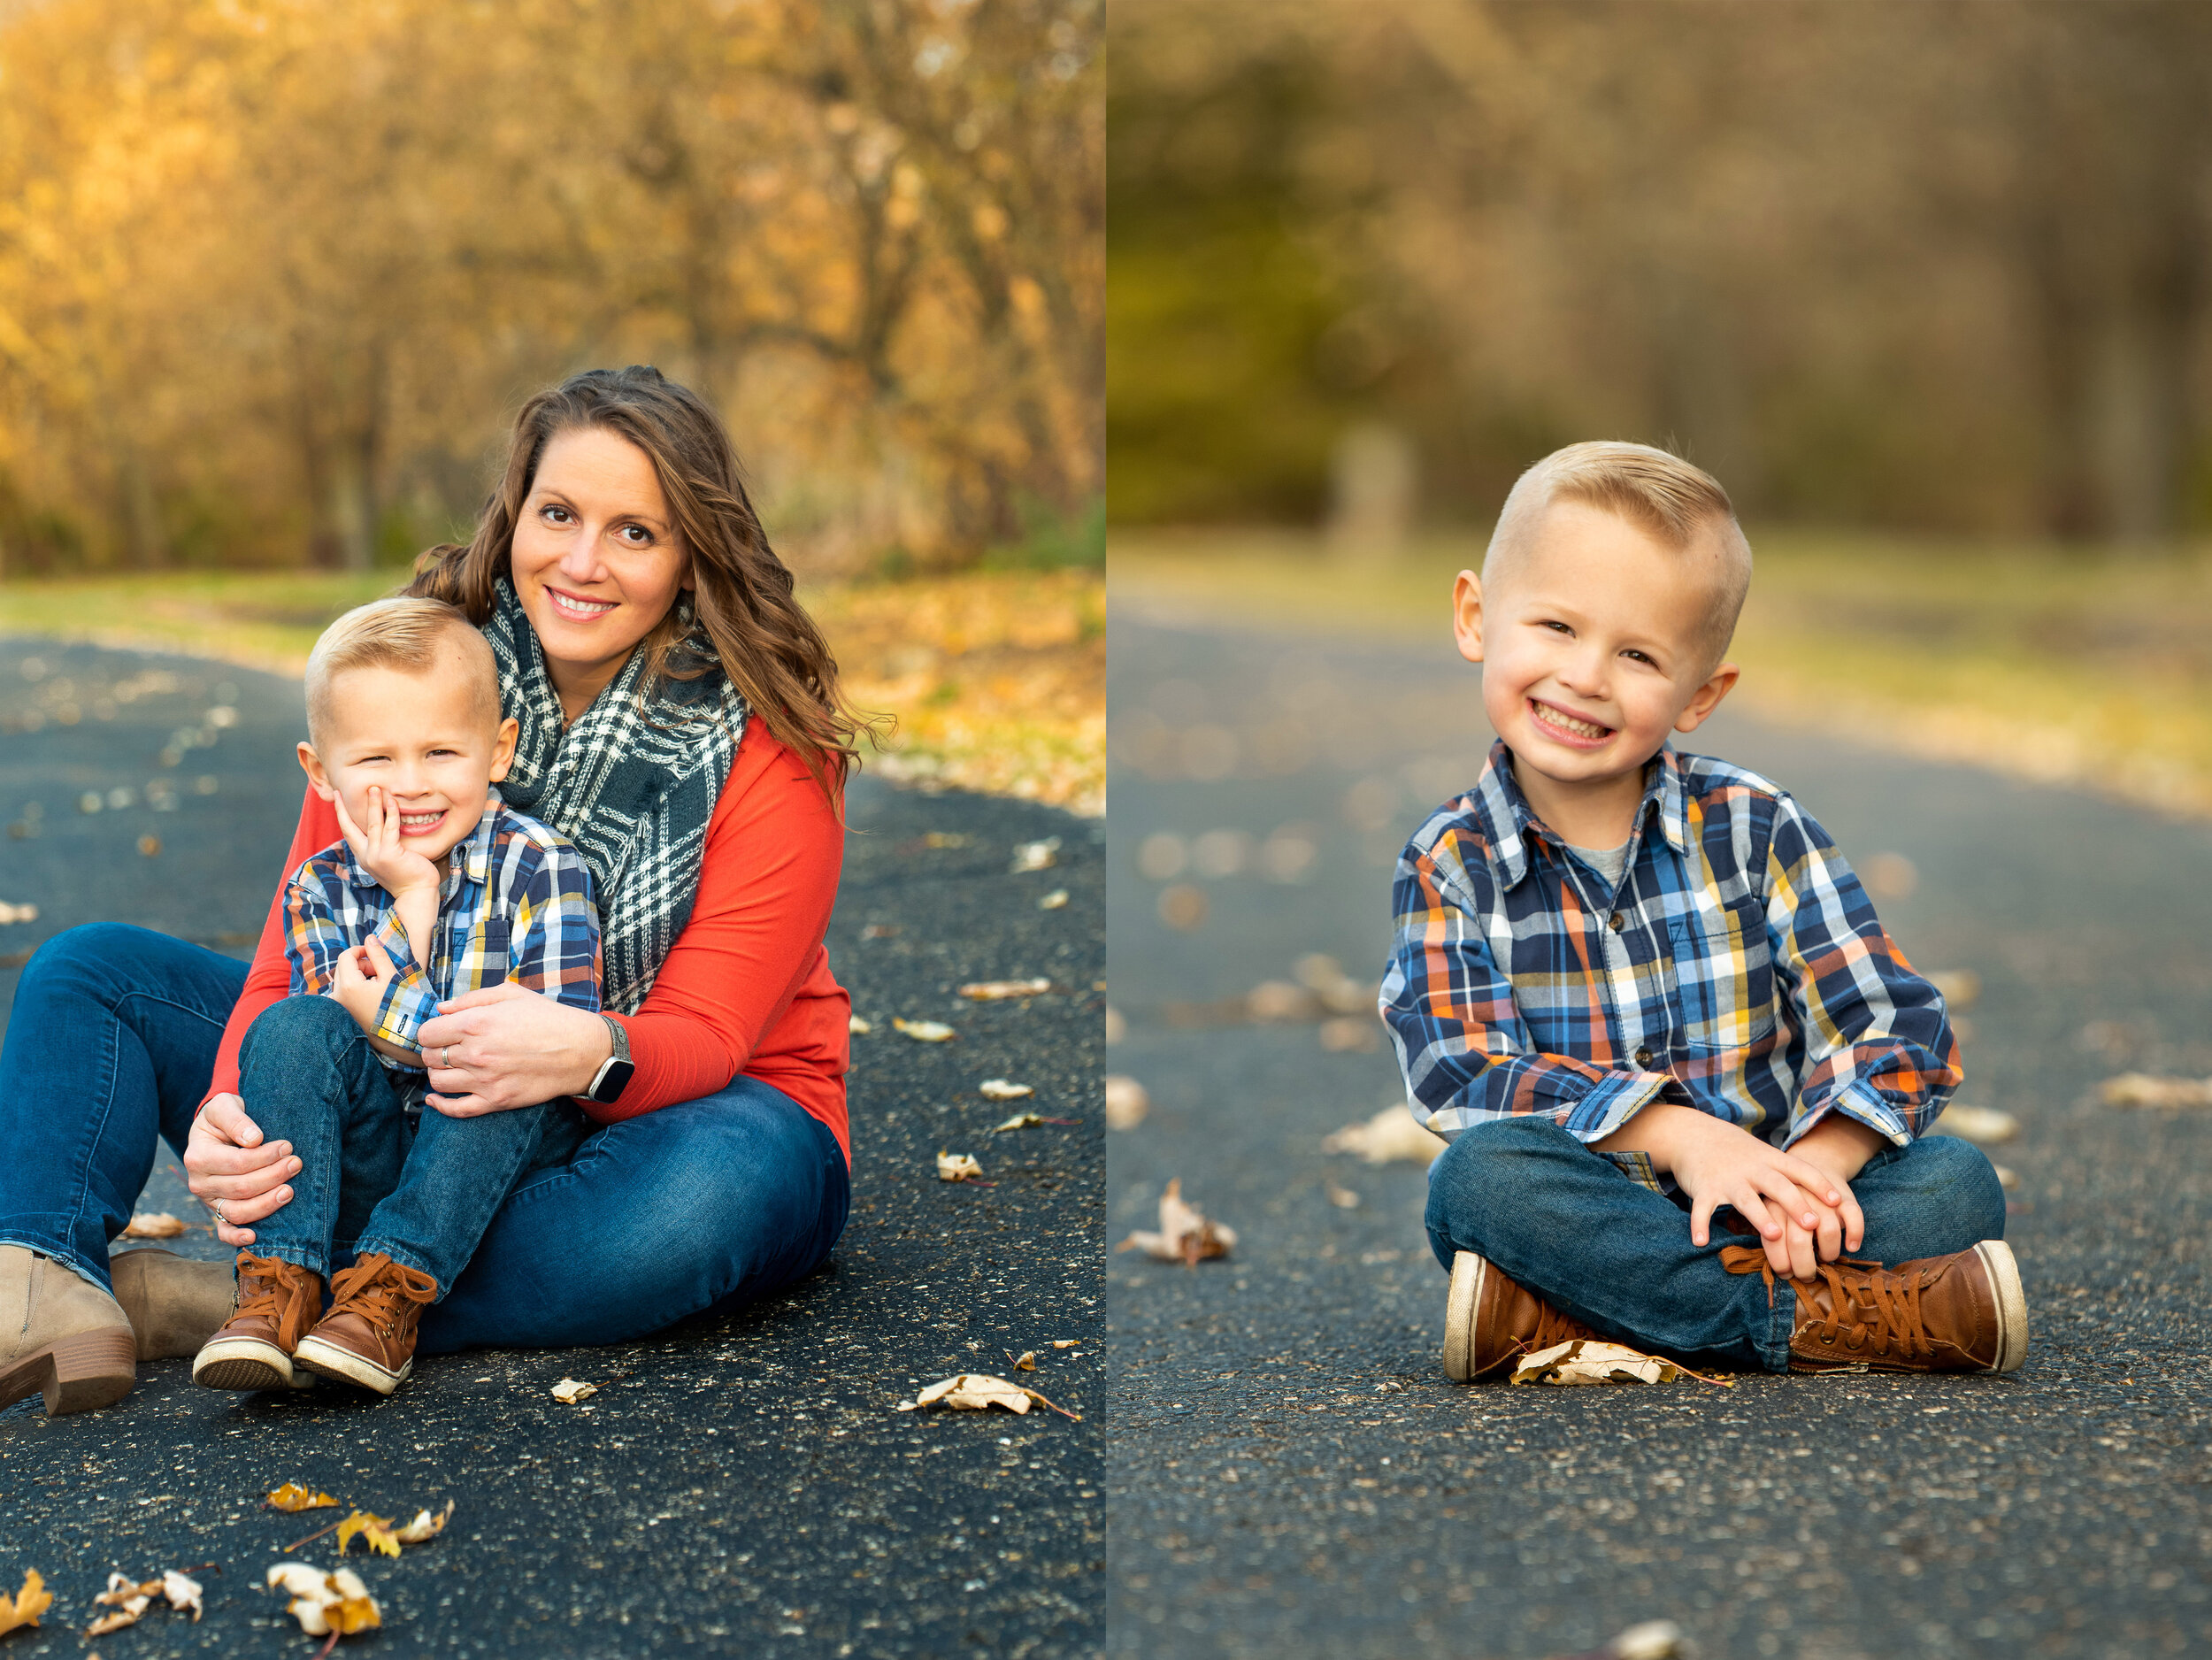 Mom and Child Portrait Photography by Sweet Pickins Studio